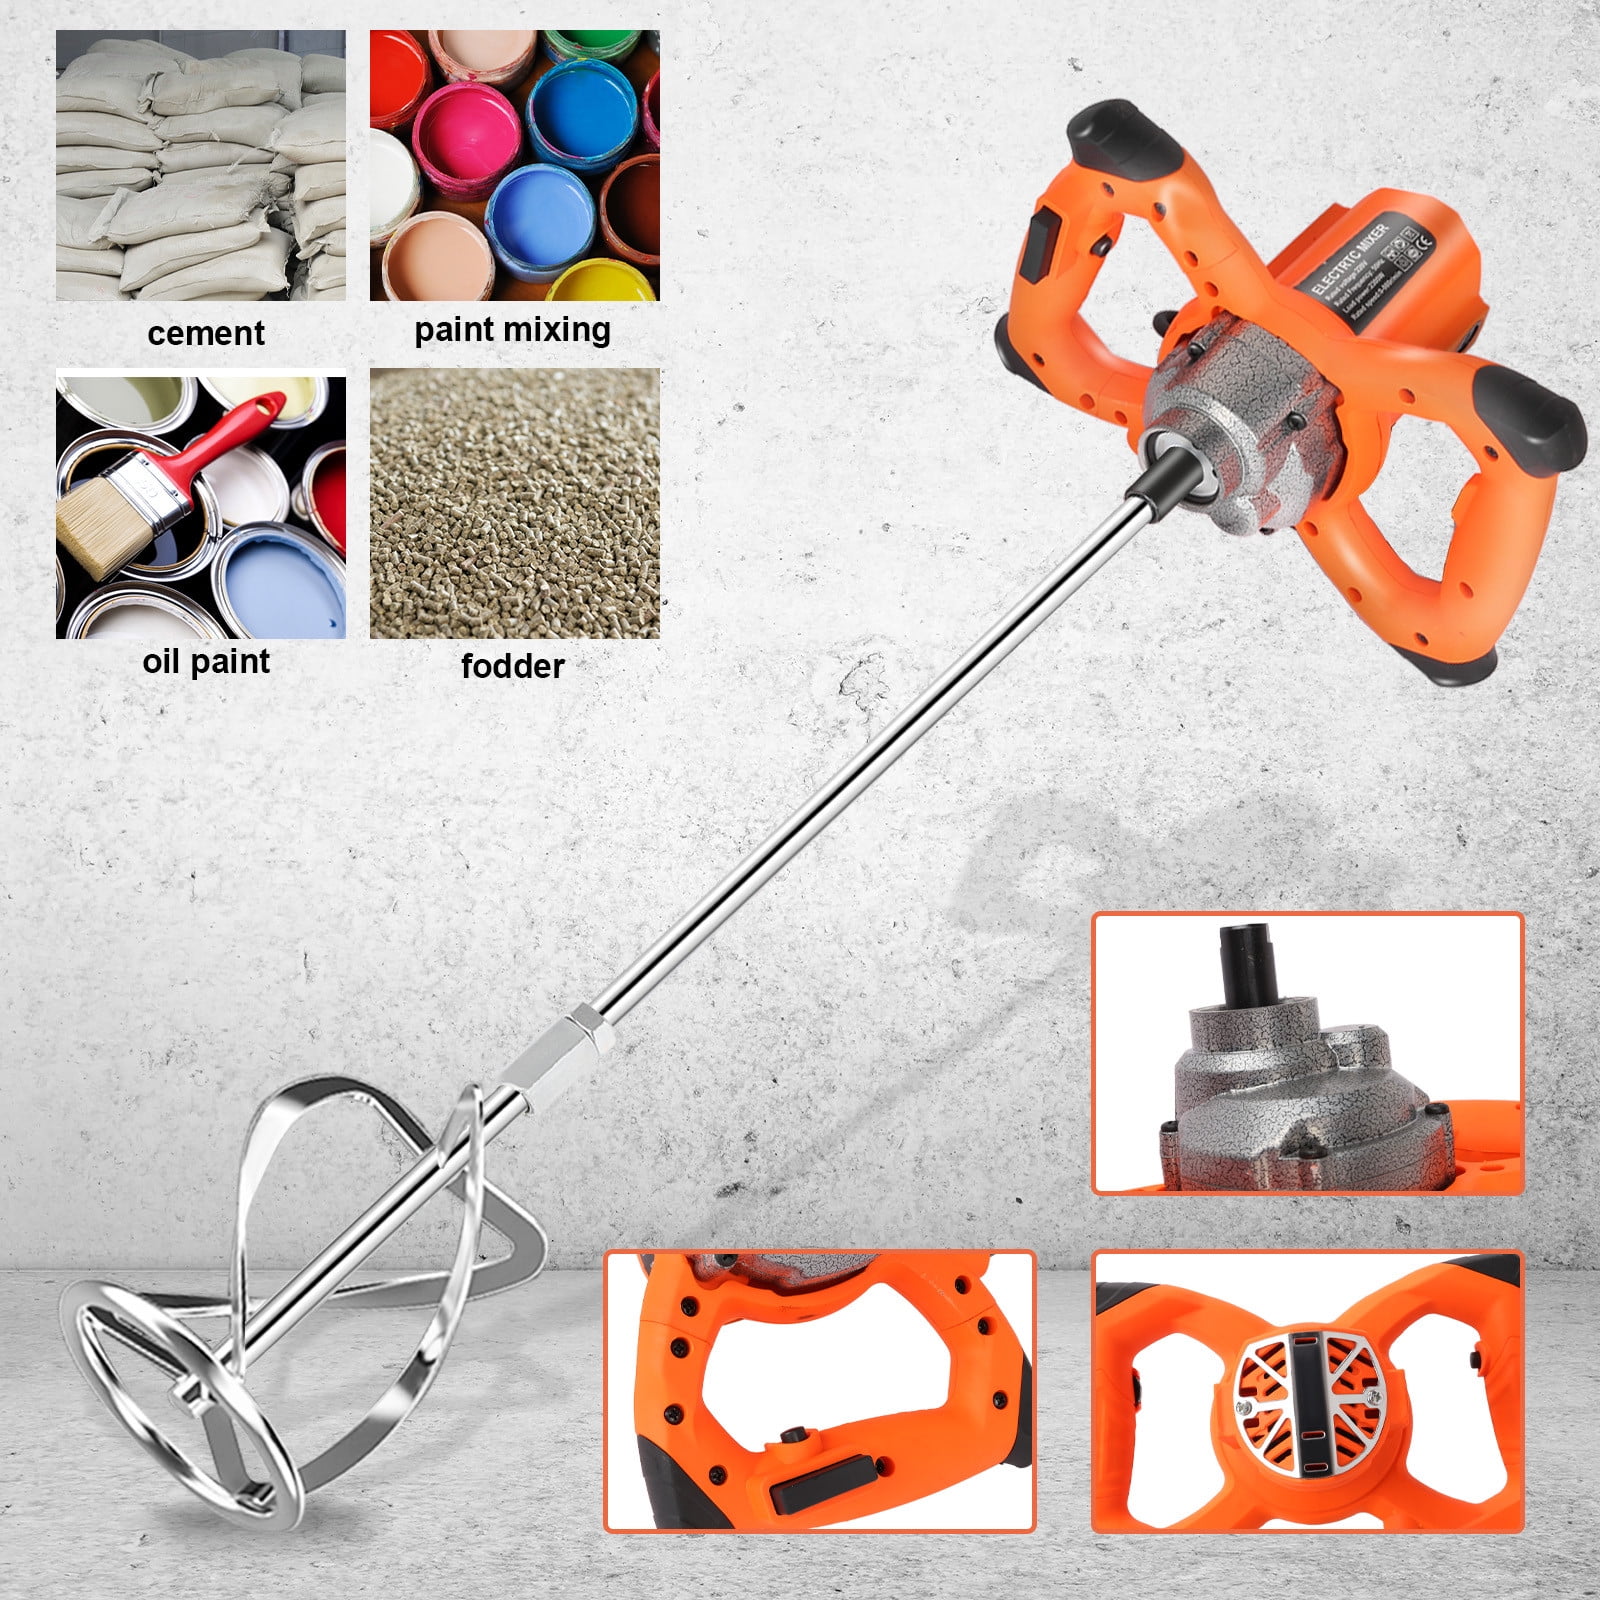 2380W Electric Plaster Paddle Mixer Drill Mortar Cement Paint Stirrer Whisk 240V